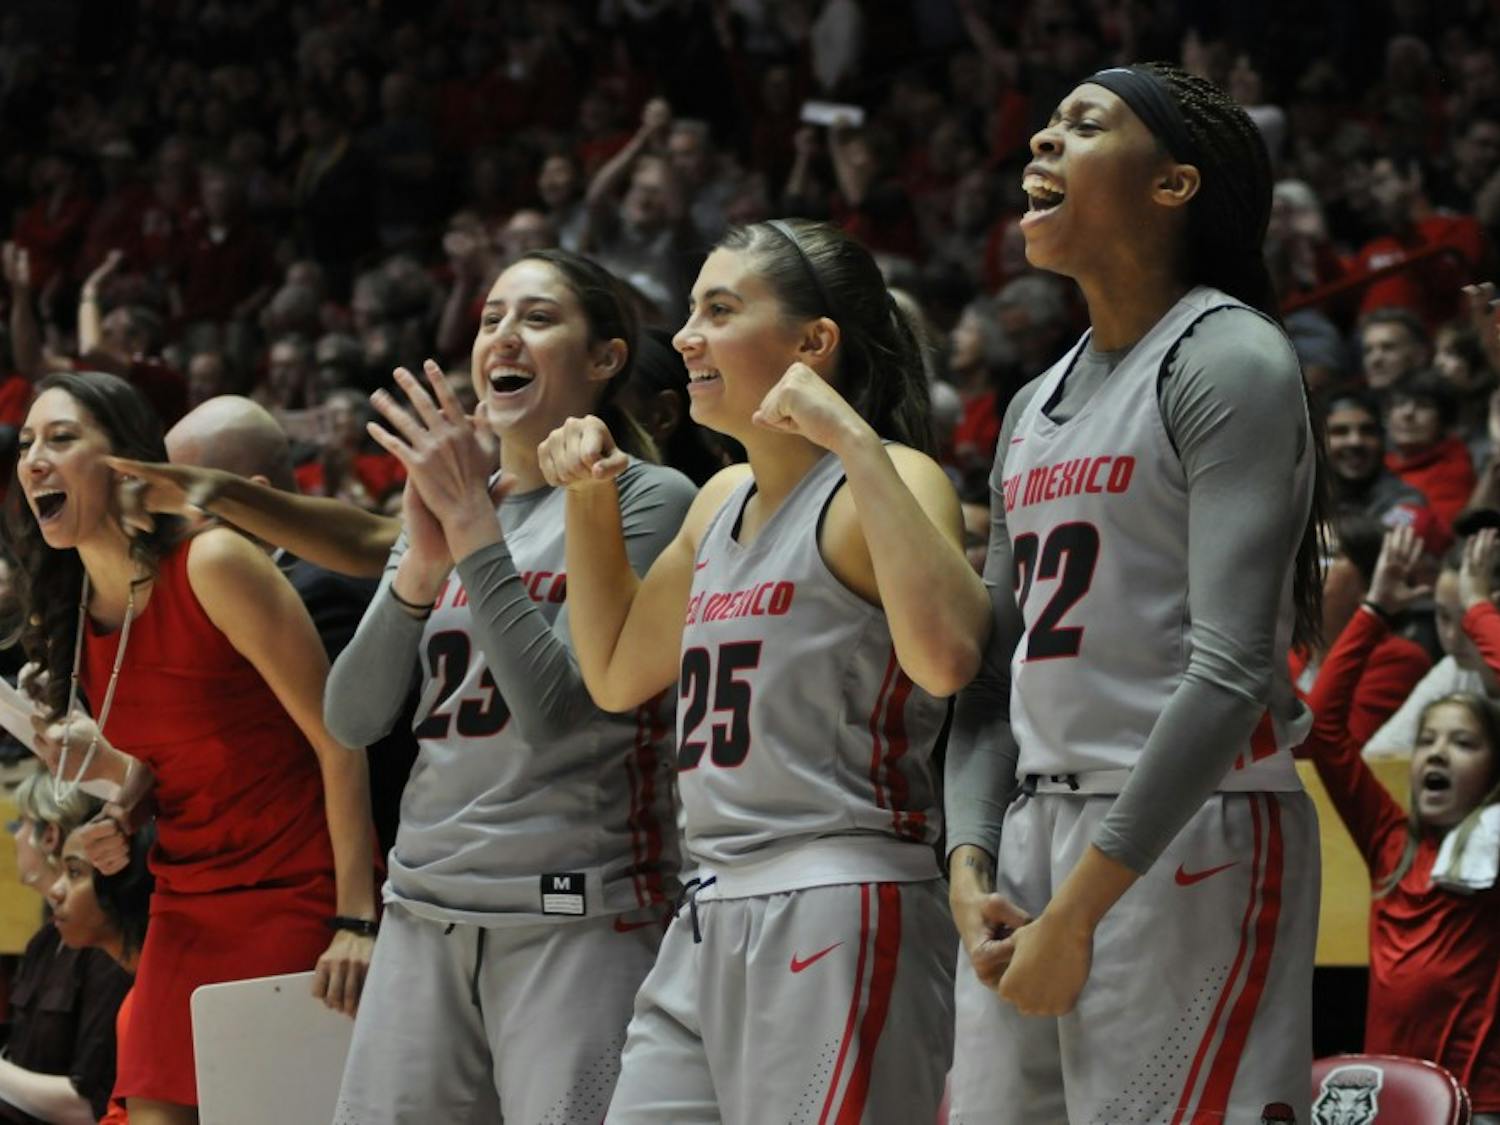 (From right to left) Antonia Anderson, No. 32, Laneah Bryan, No. 25, Jaeydn De La Cerda, No. 23, and Director of Operations Vera Jo Bustos celebrate following a made 3-pointer by Alex Lapeyrolerie during overtime against the Naval Academy on Dec. 10, 2017. The Lobos used a strong overtime period to win 94-87.